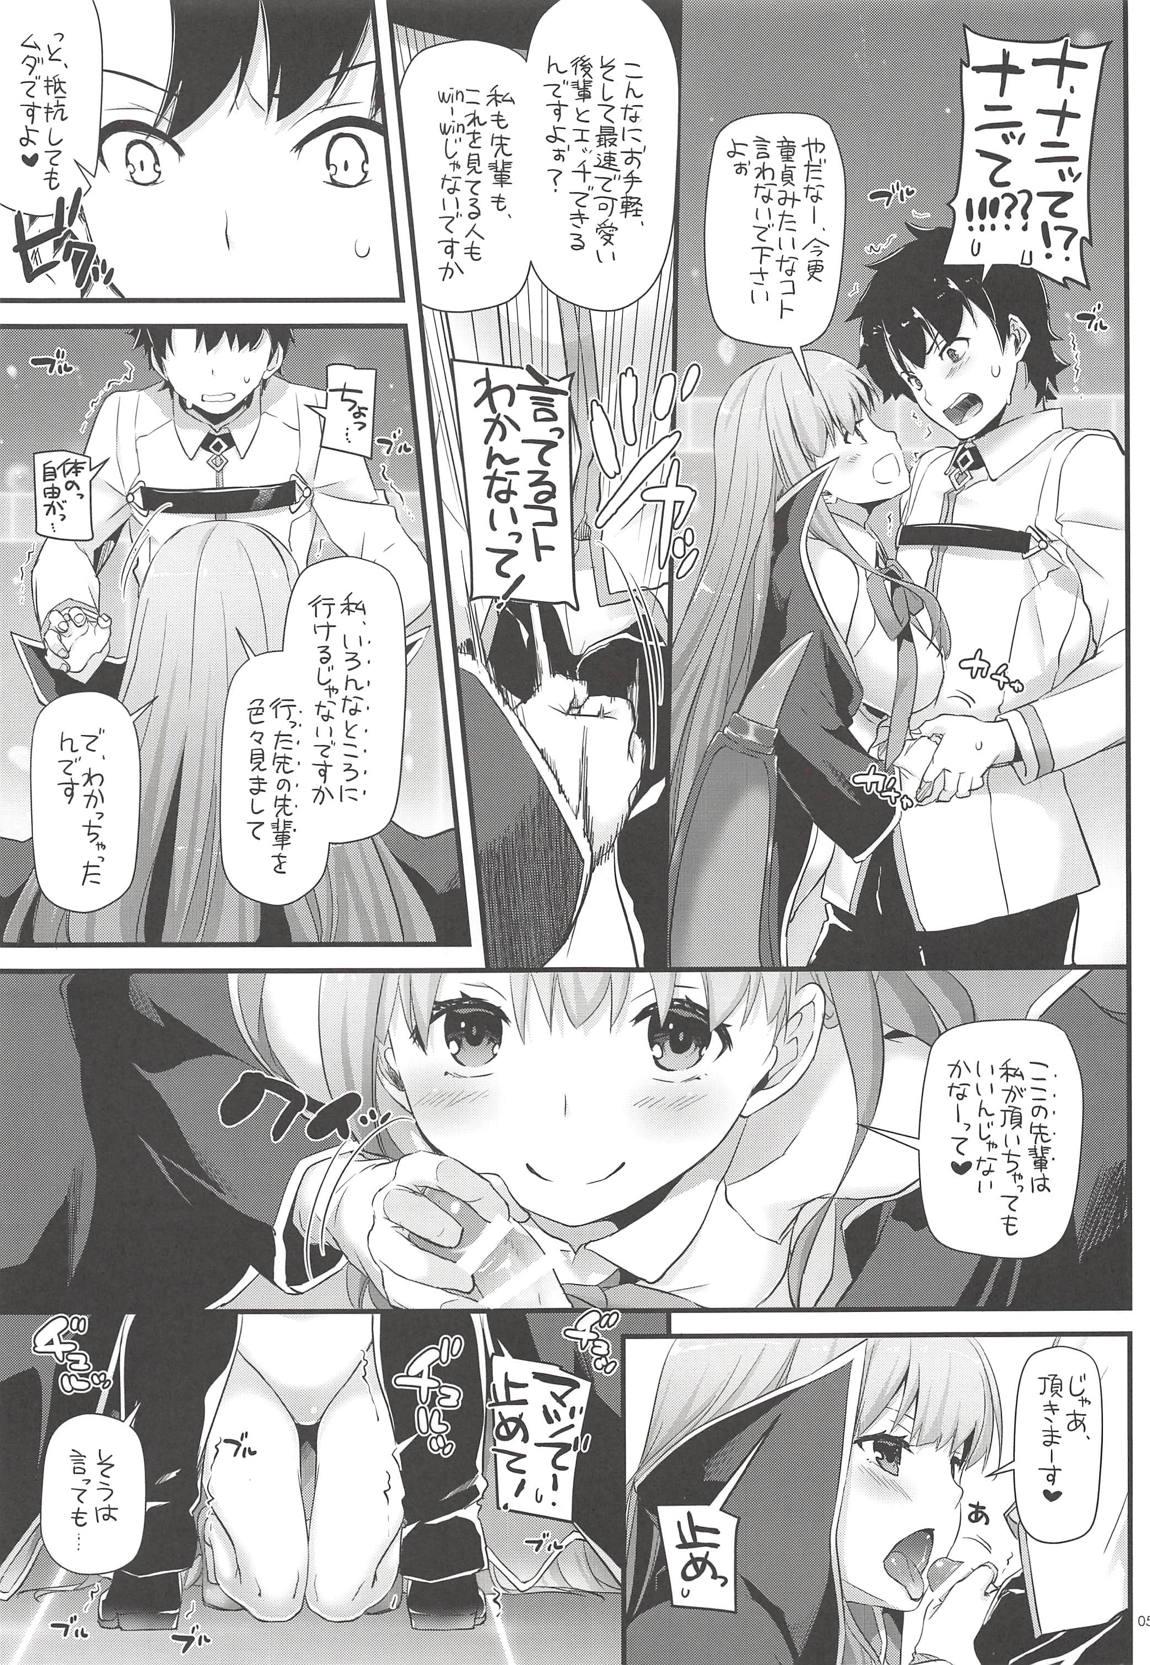 White Chick D.L. action 124 - Fate grand order Ethnic - Page 4